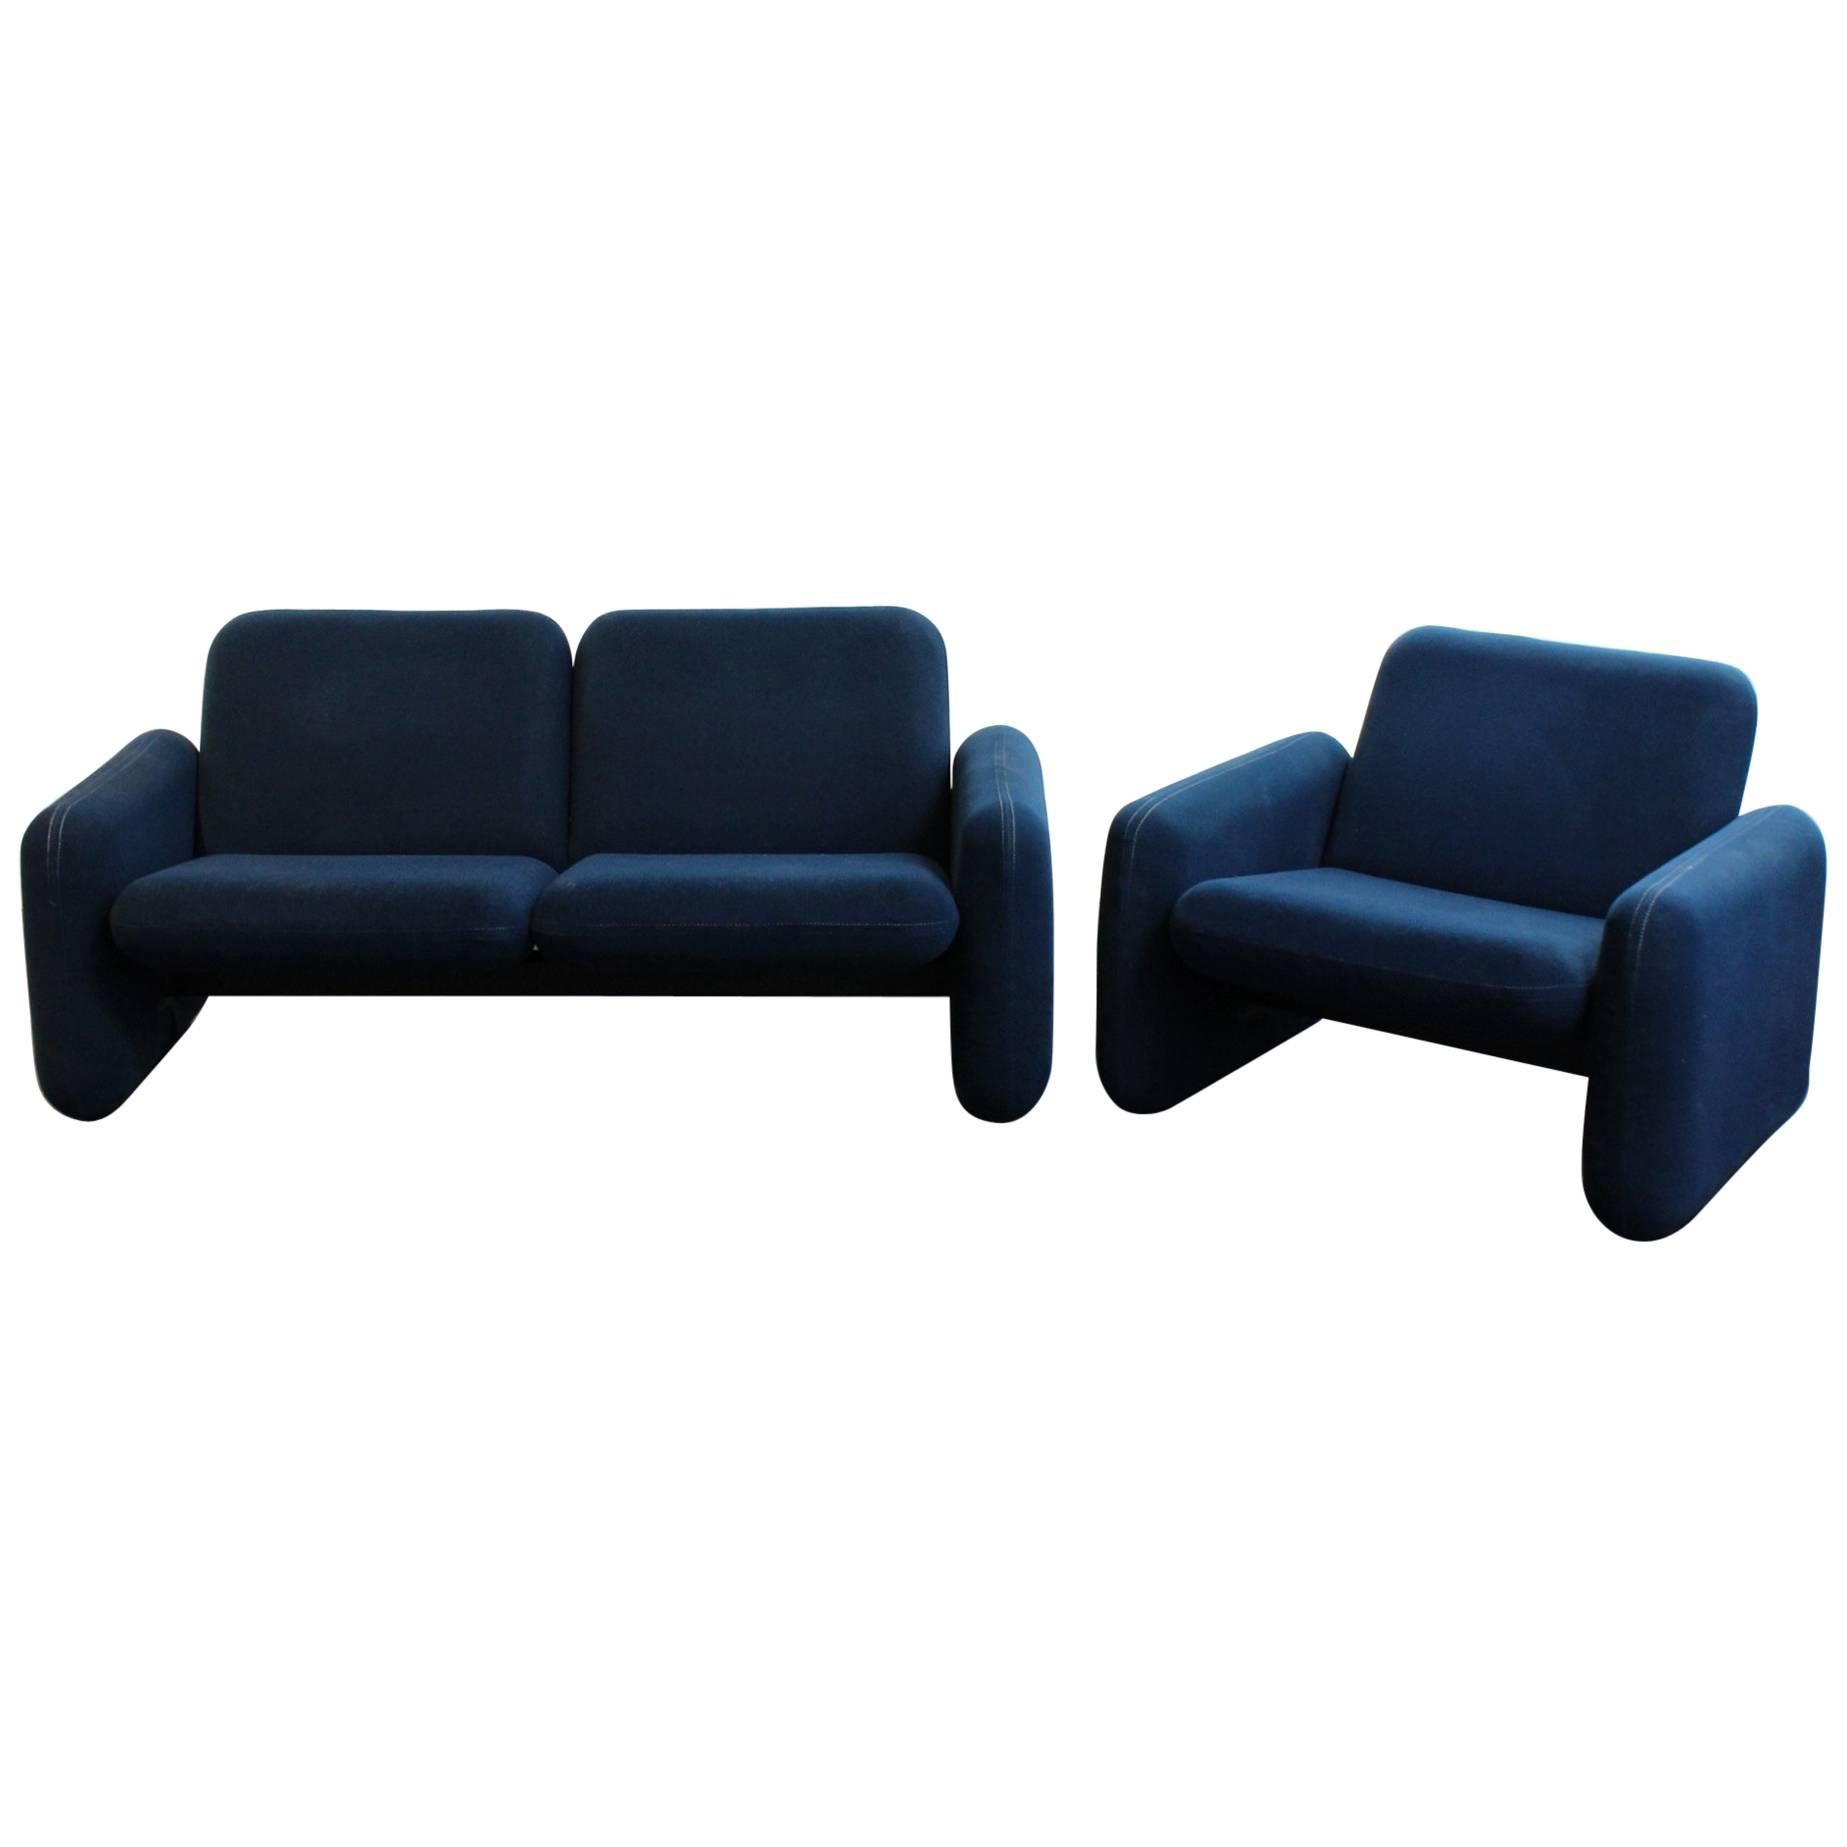 1970s Modern Ray Wilkes for Herman Miller "Chicklet" Loveseat and Chair Sofa Set